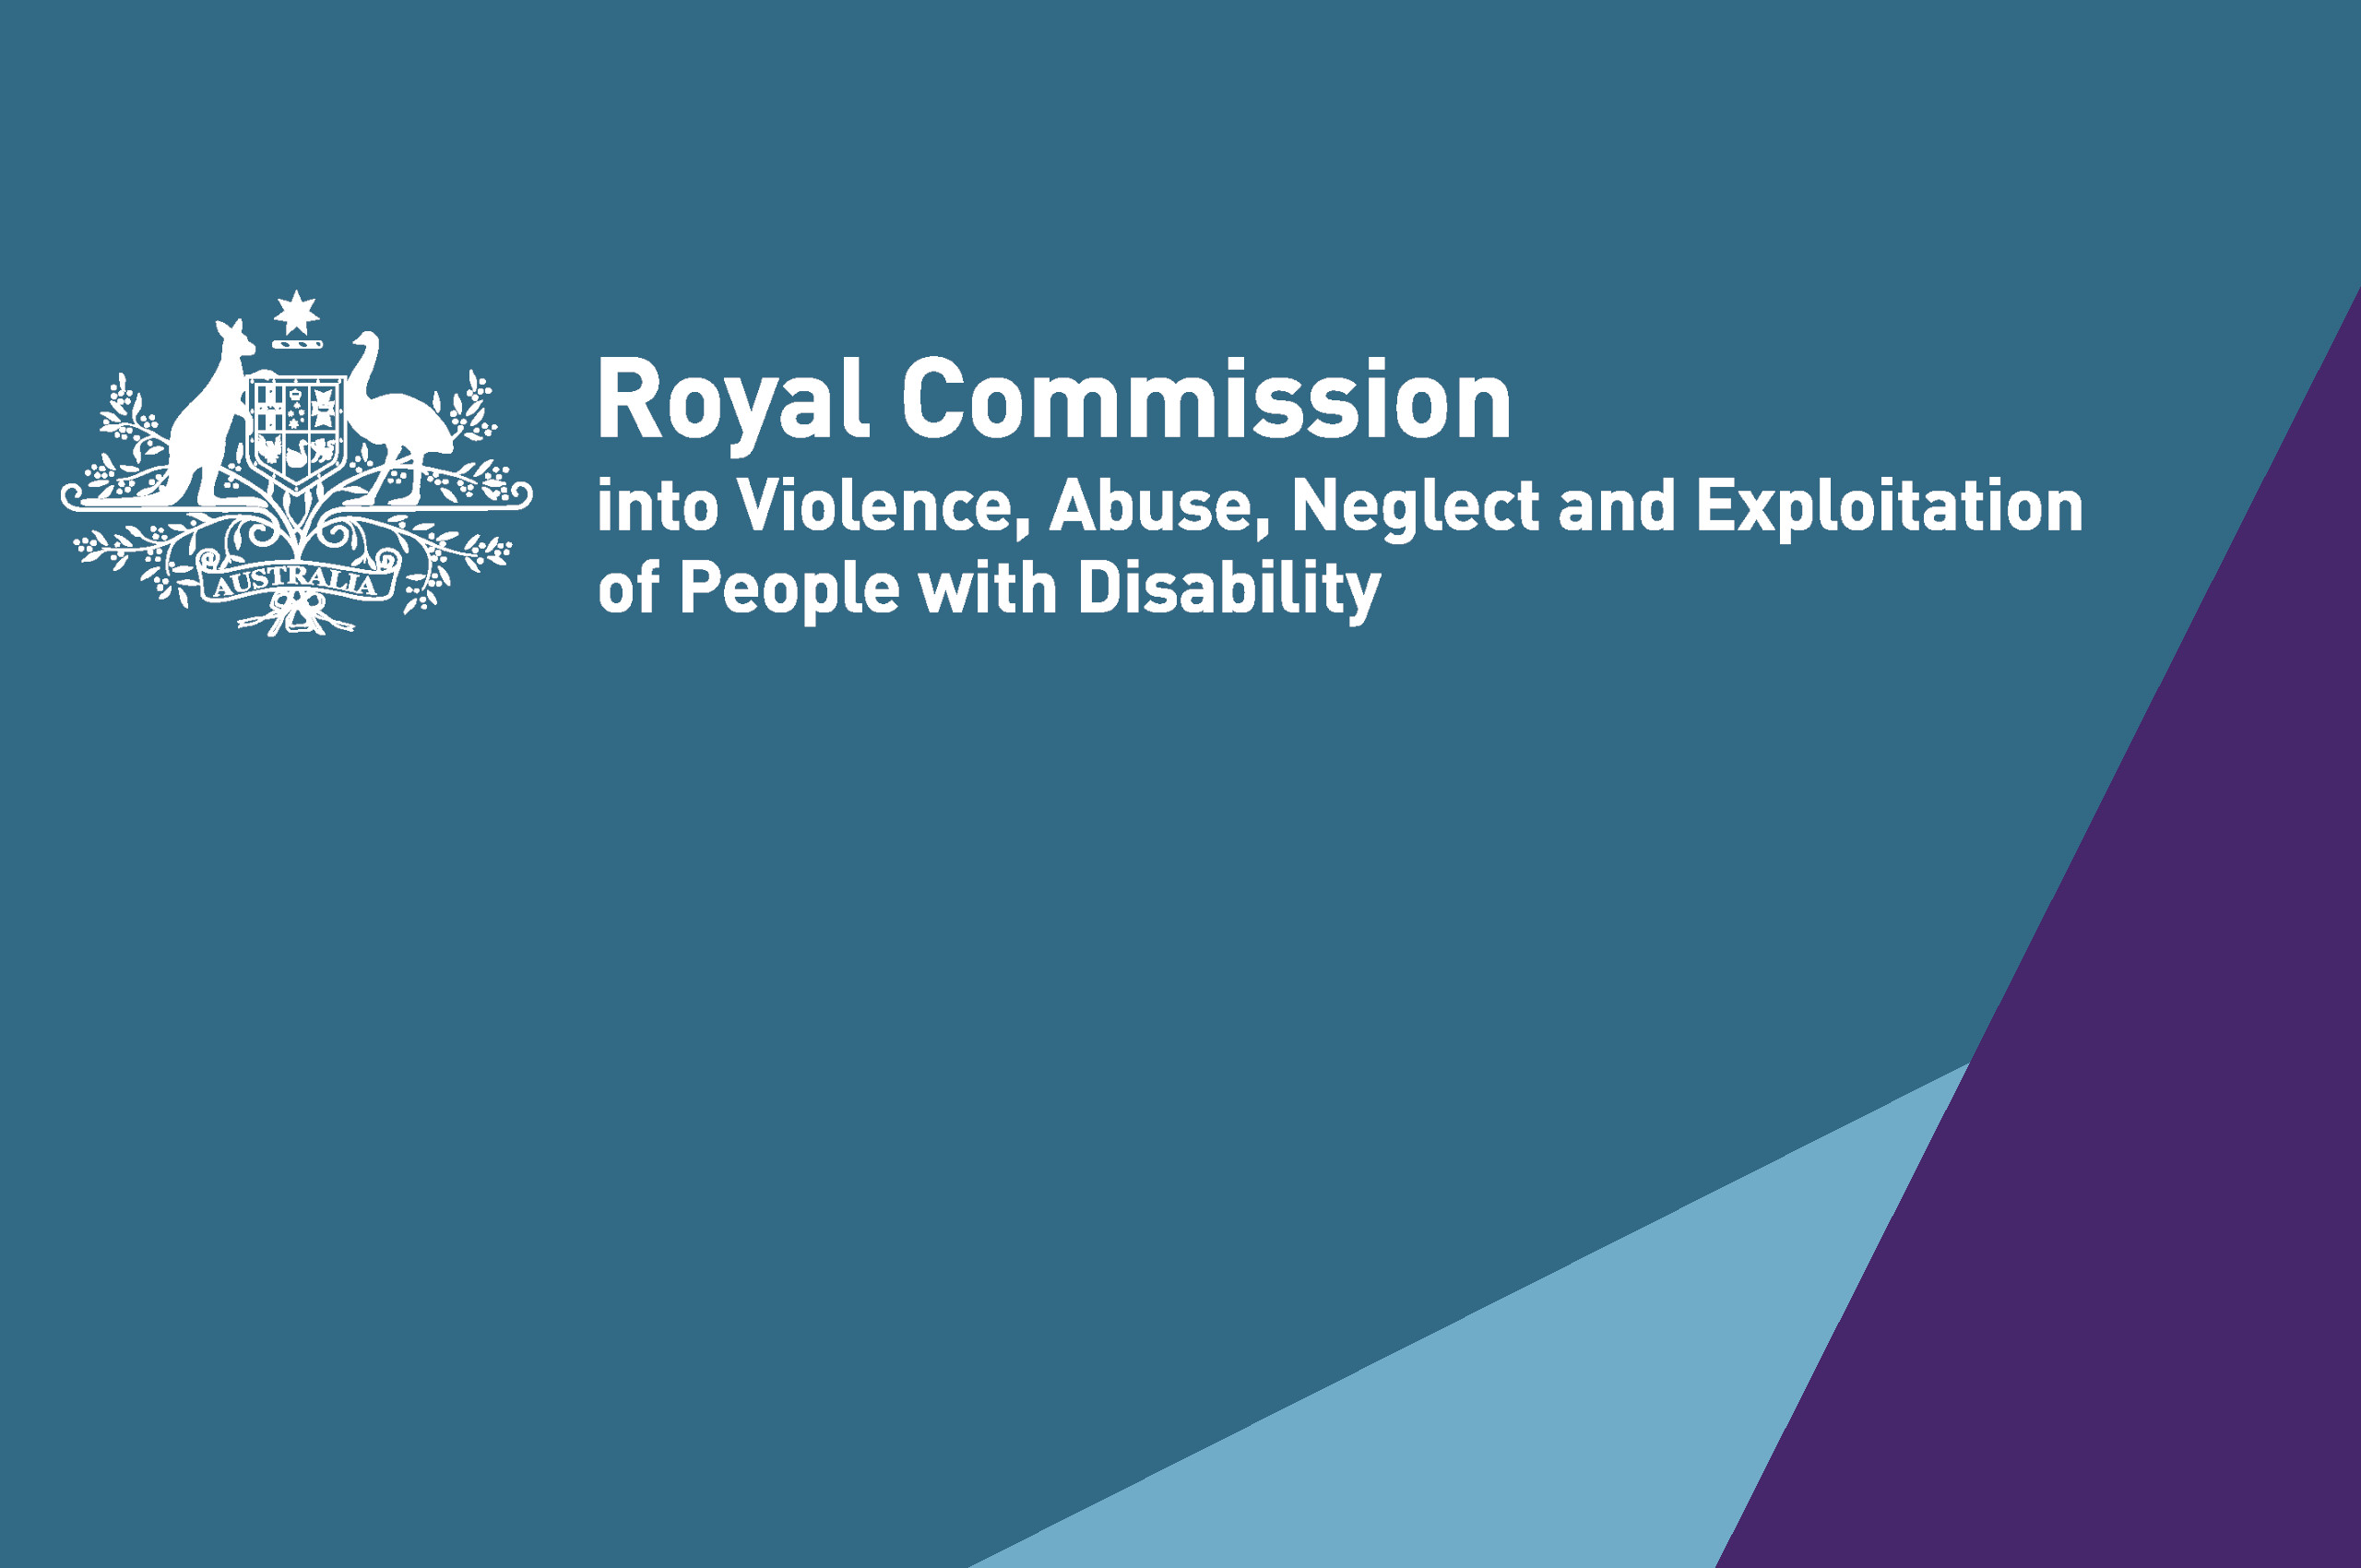 Design of purple and aqua triangles on a teal background with the Royal Commission into Violence, Abuse, Neglect and Exploitation of People with Disability text and Commonwealth Coat of Arms